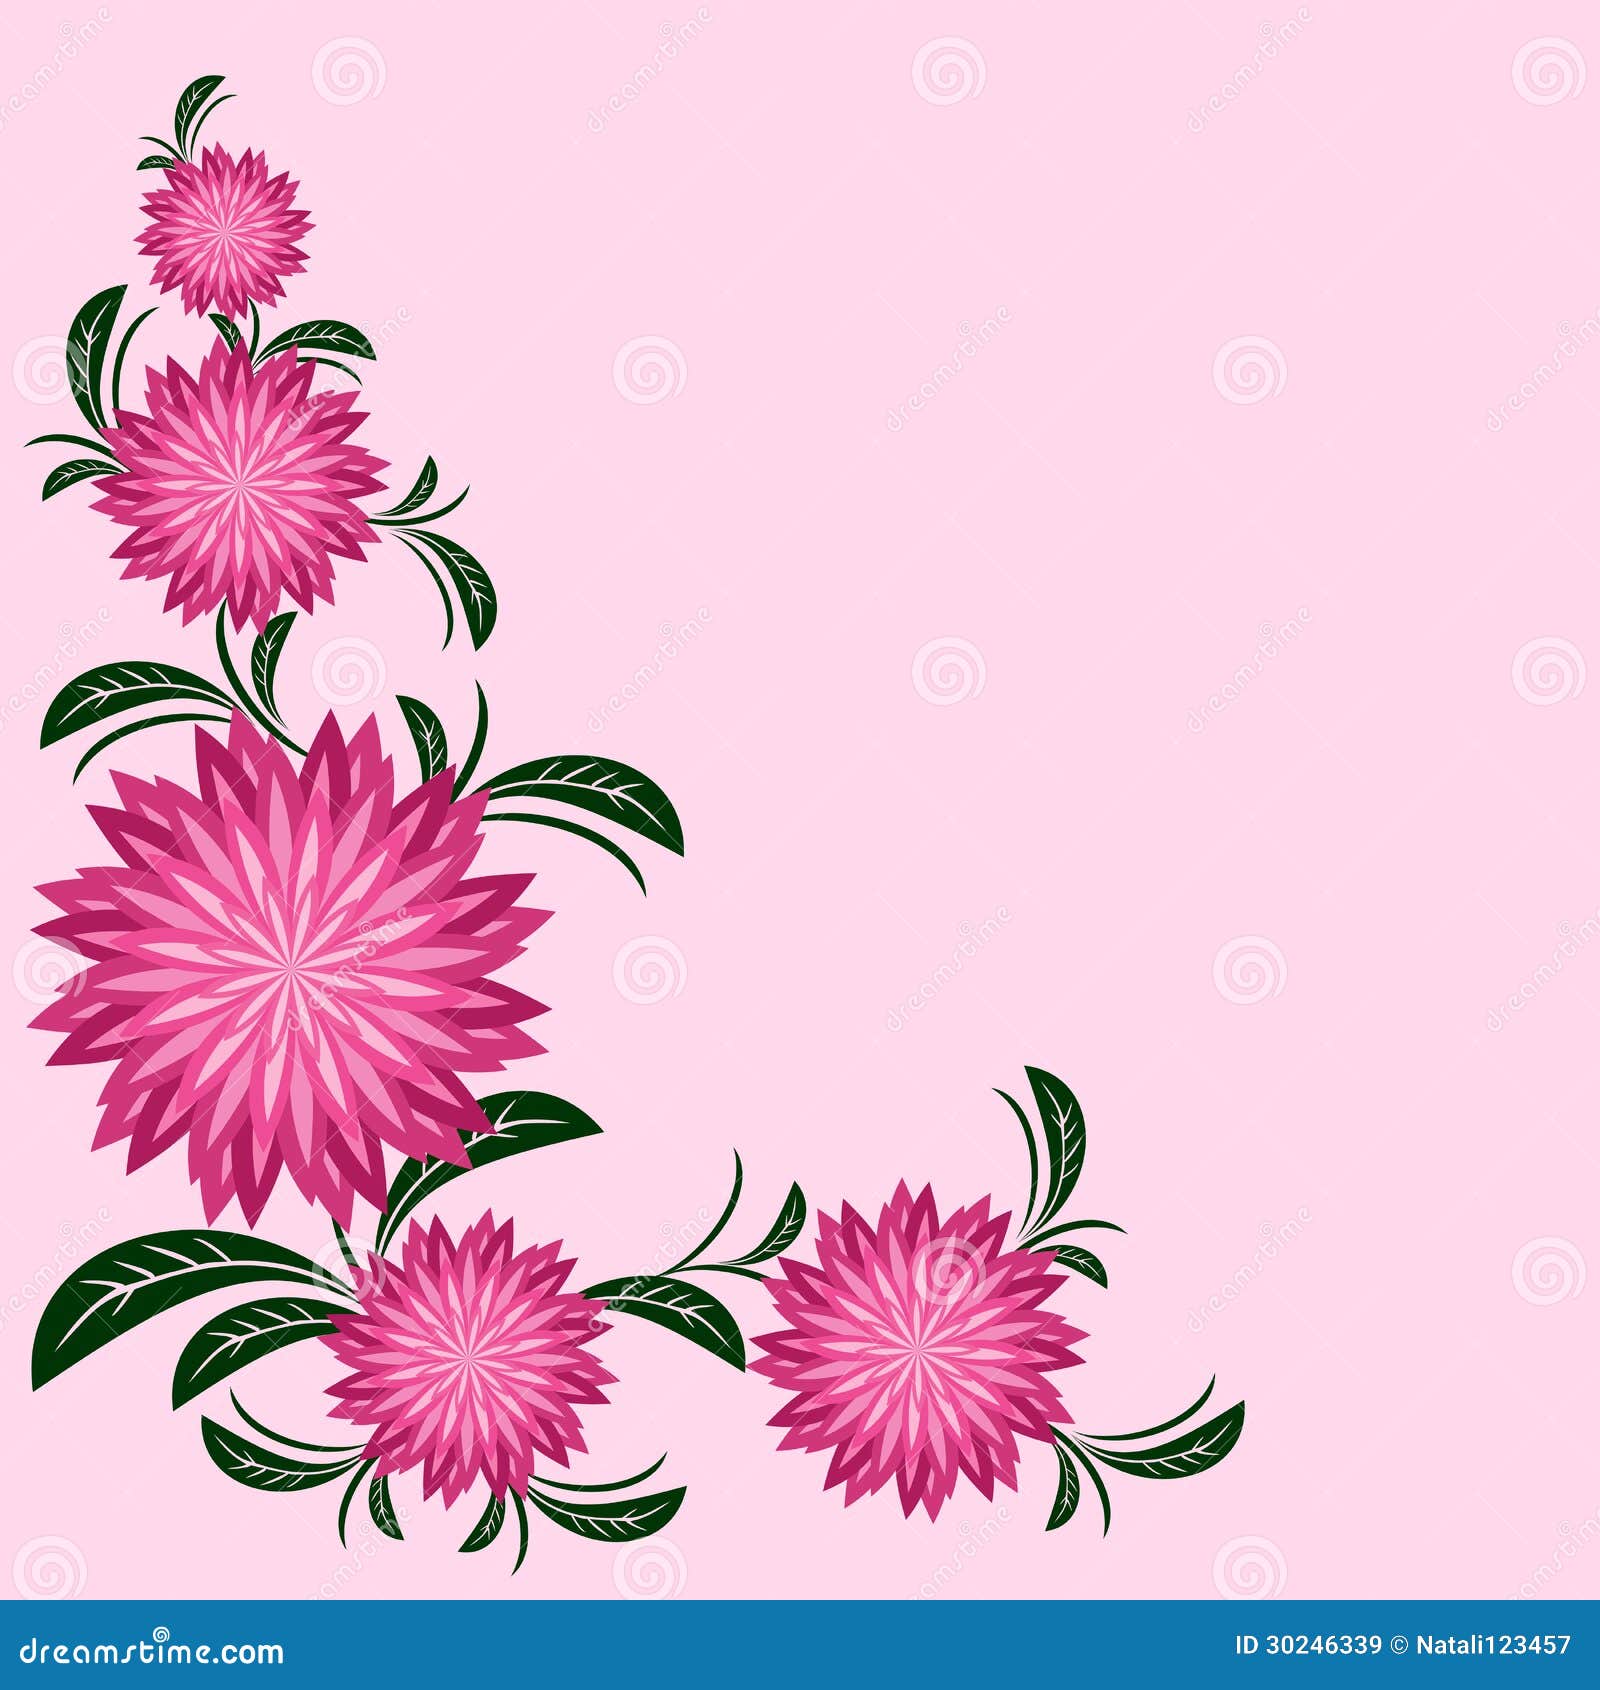 Floral Border With Chrysanthemums Stock Vector Illustration Of Decor Curl 30246339